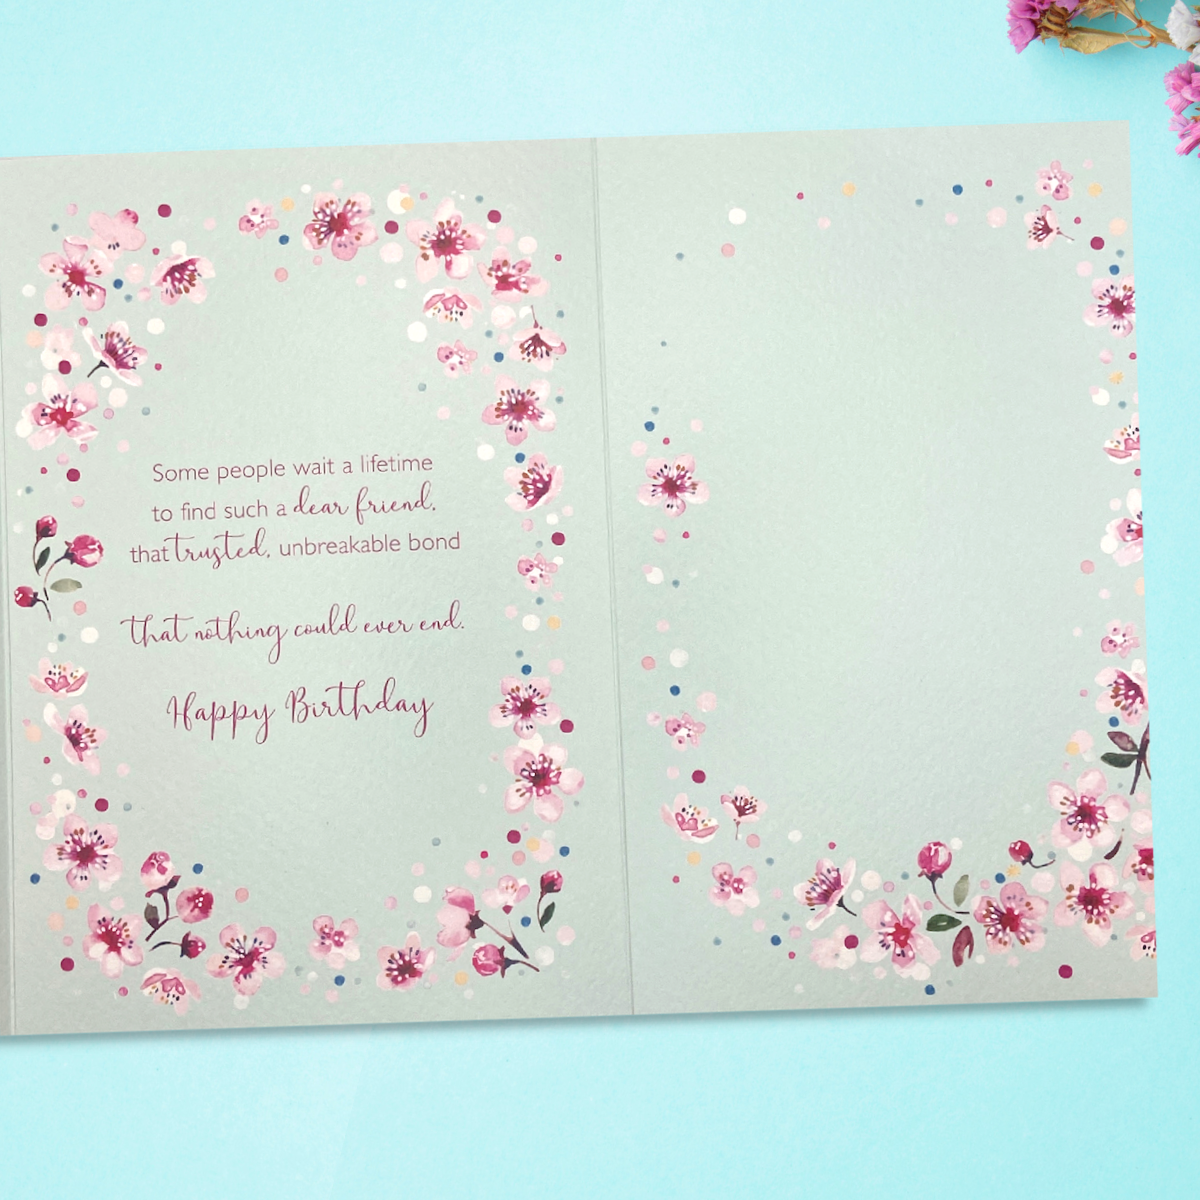 Two further pages with floral border and verse